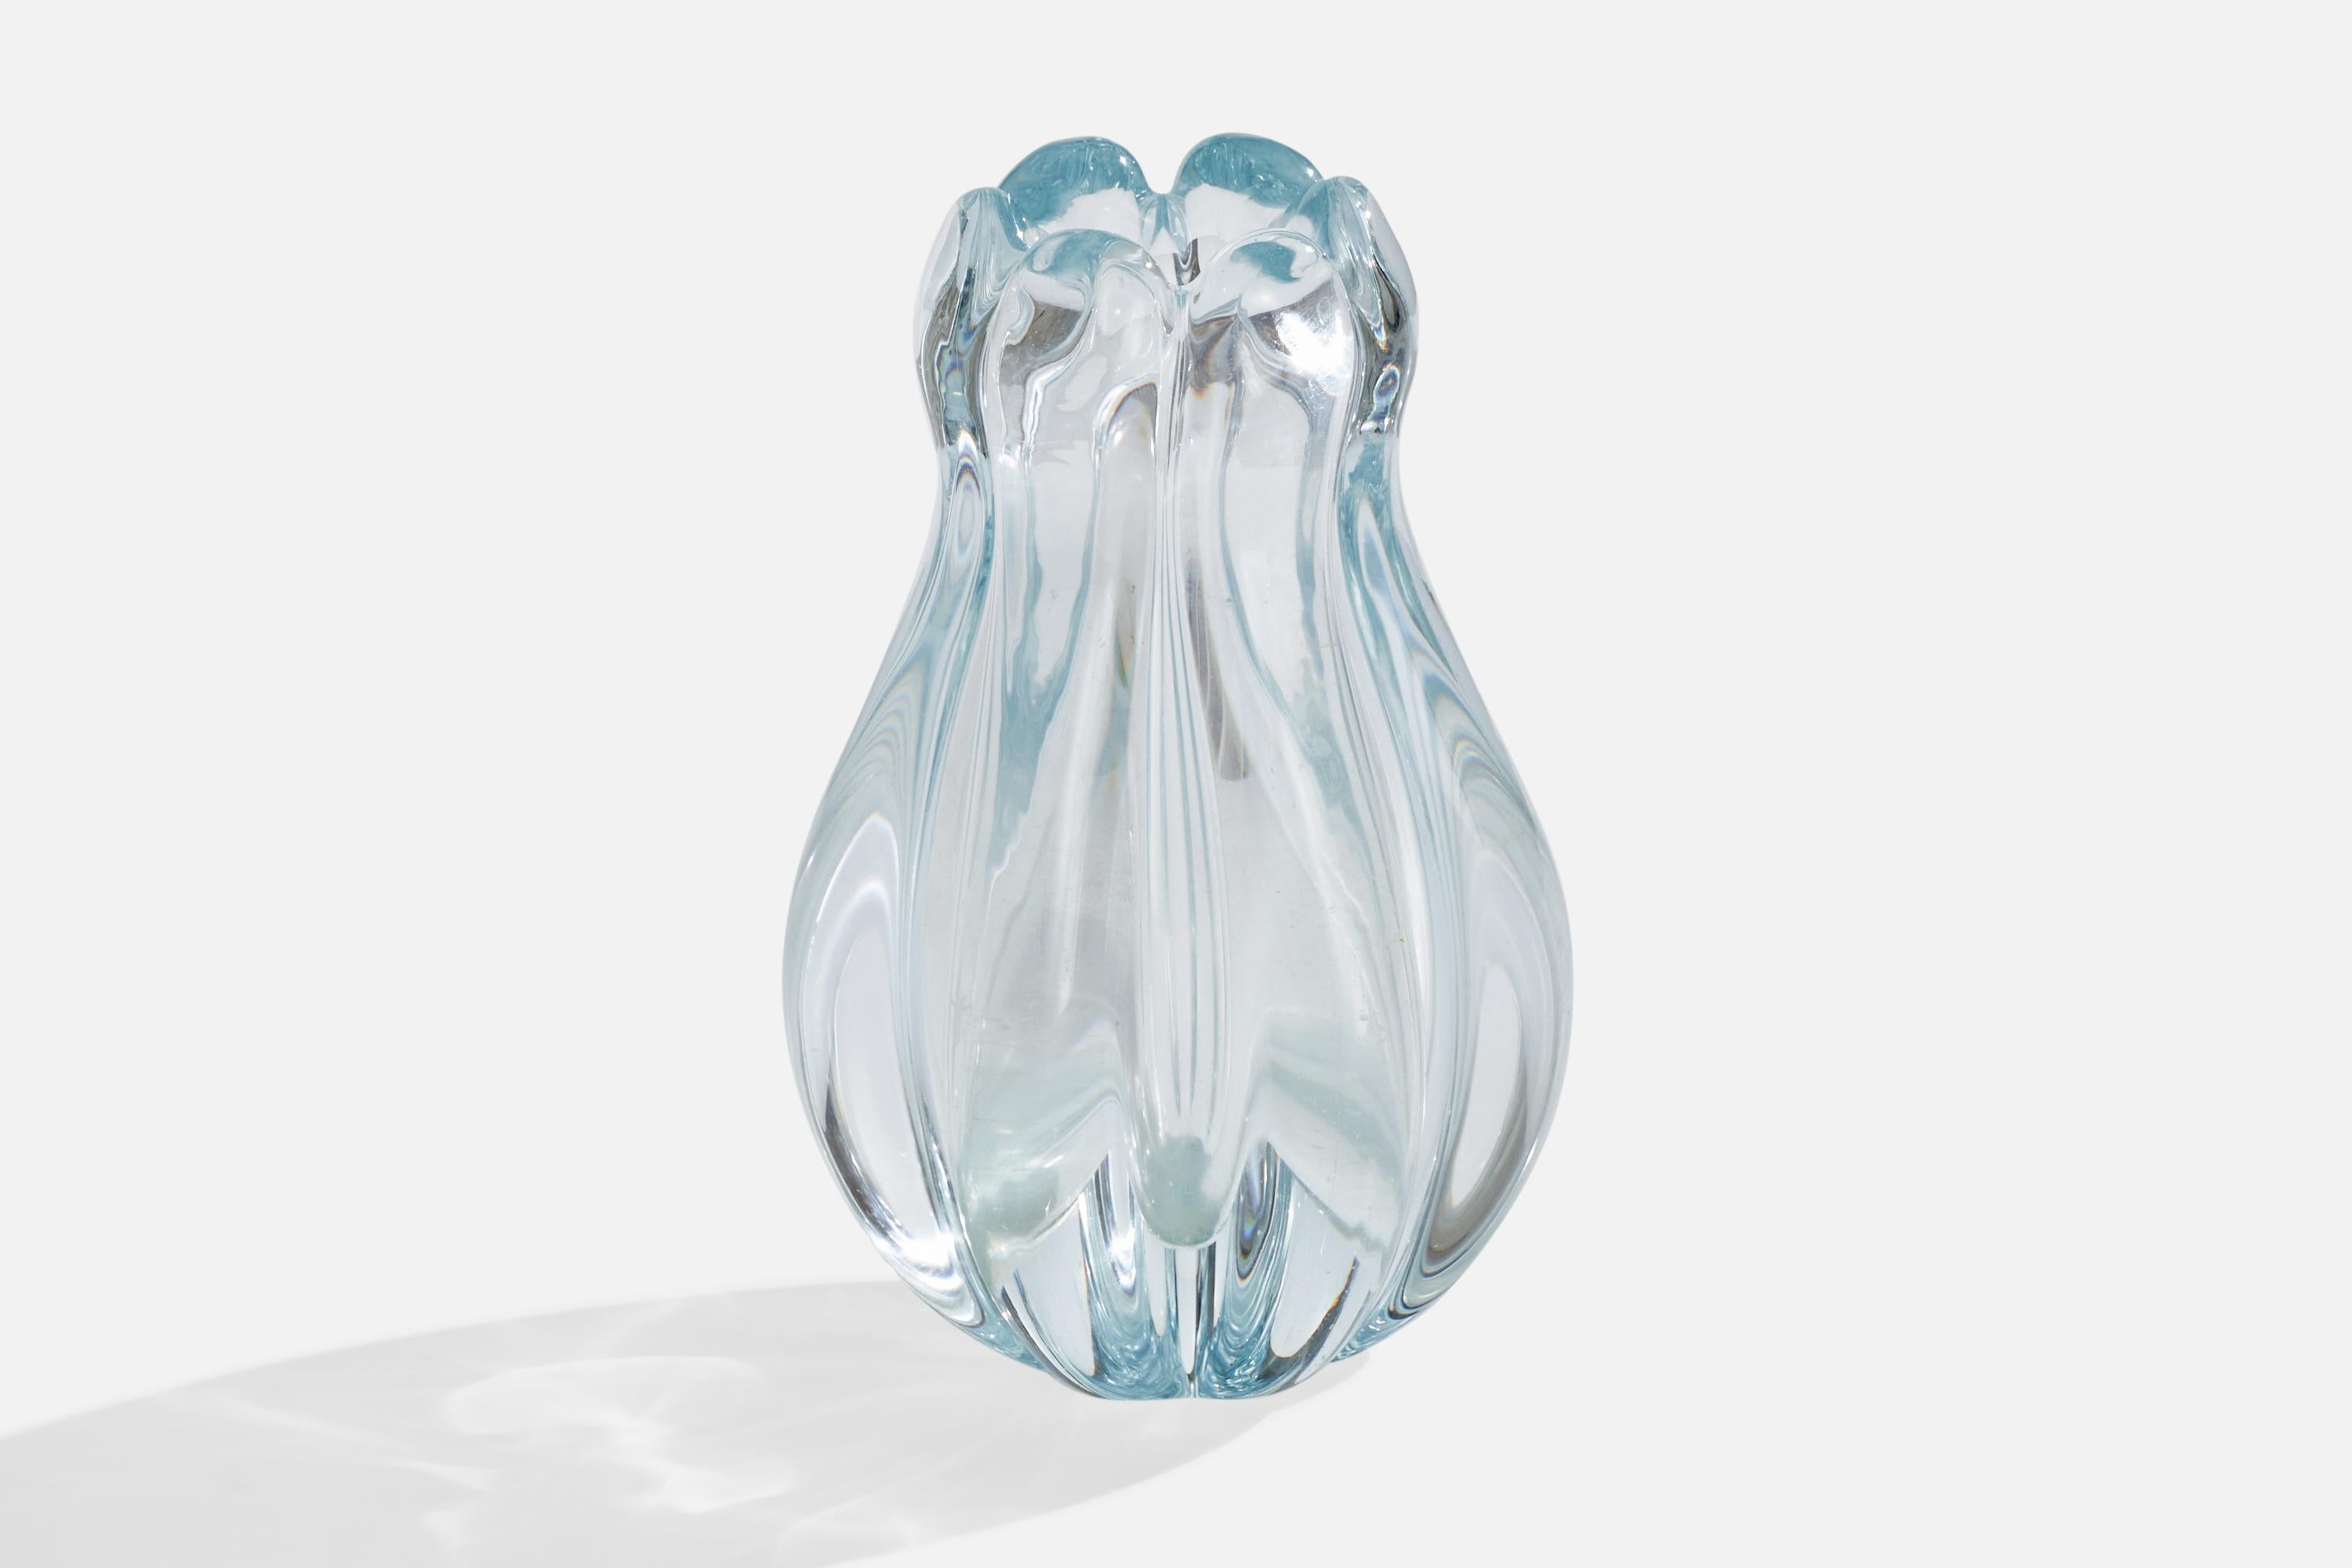 An organic blown glass vase, model Stella Polaris, designed by Vicke Lindstrand and produced by Orrefors, Sweden, c. 1940s.